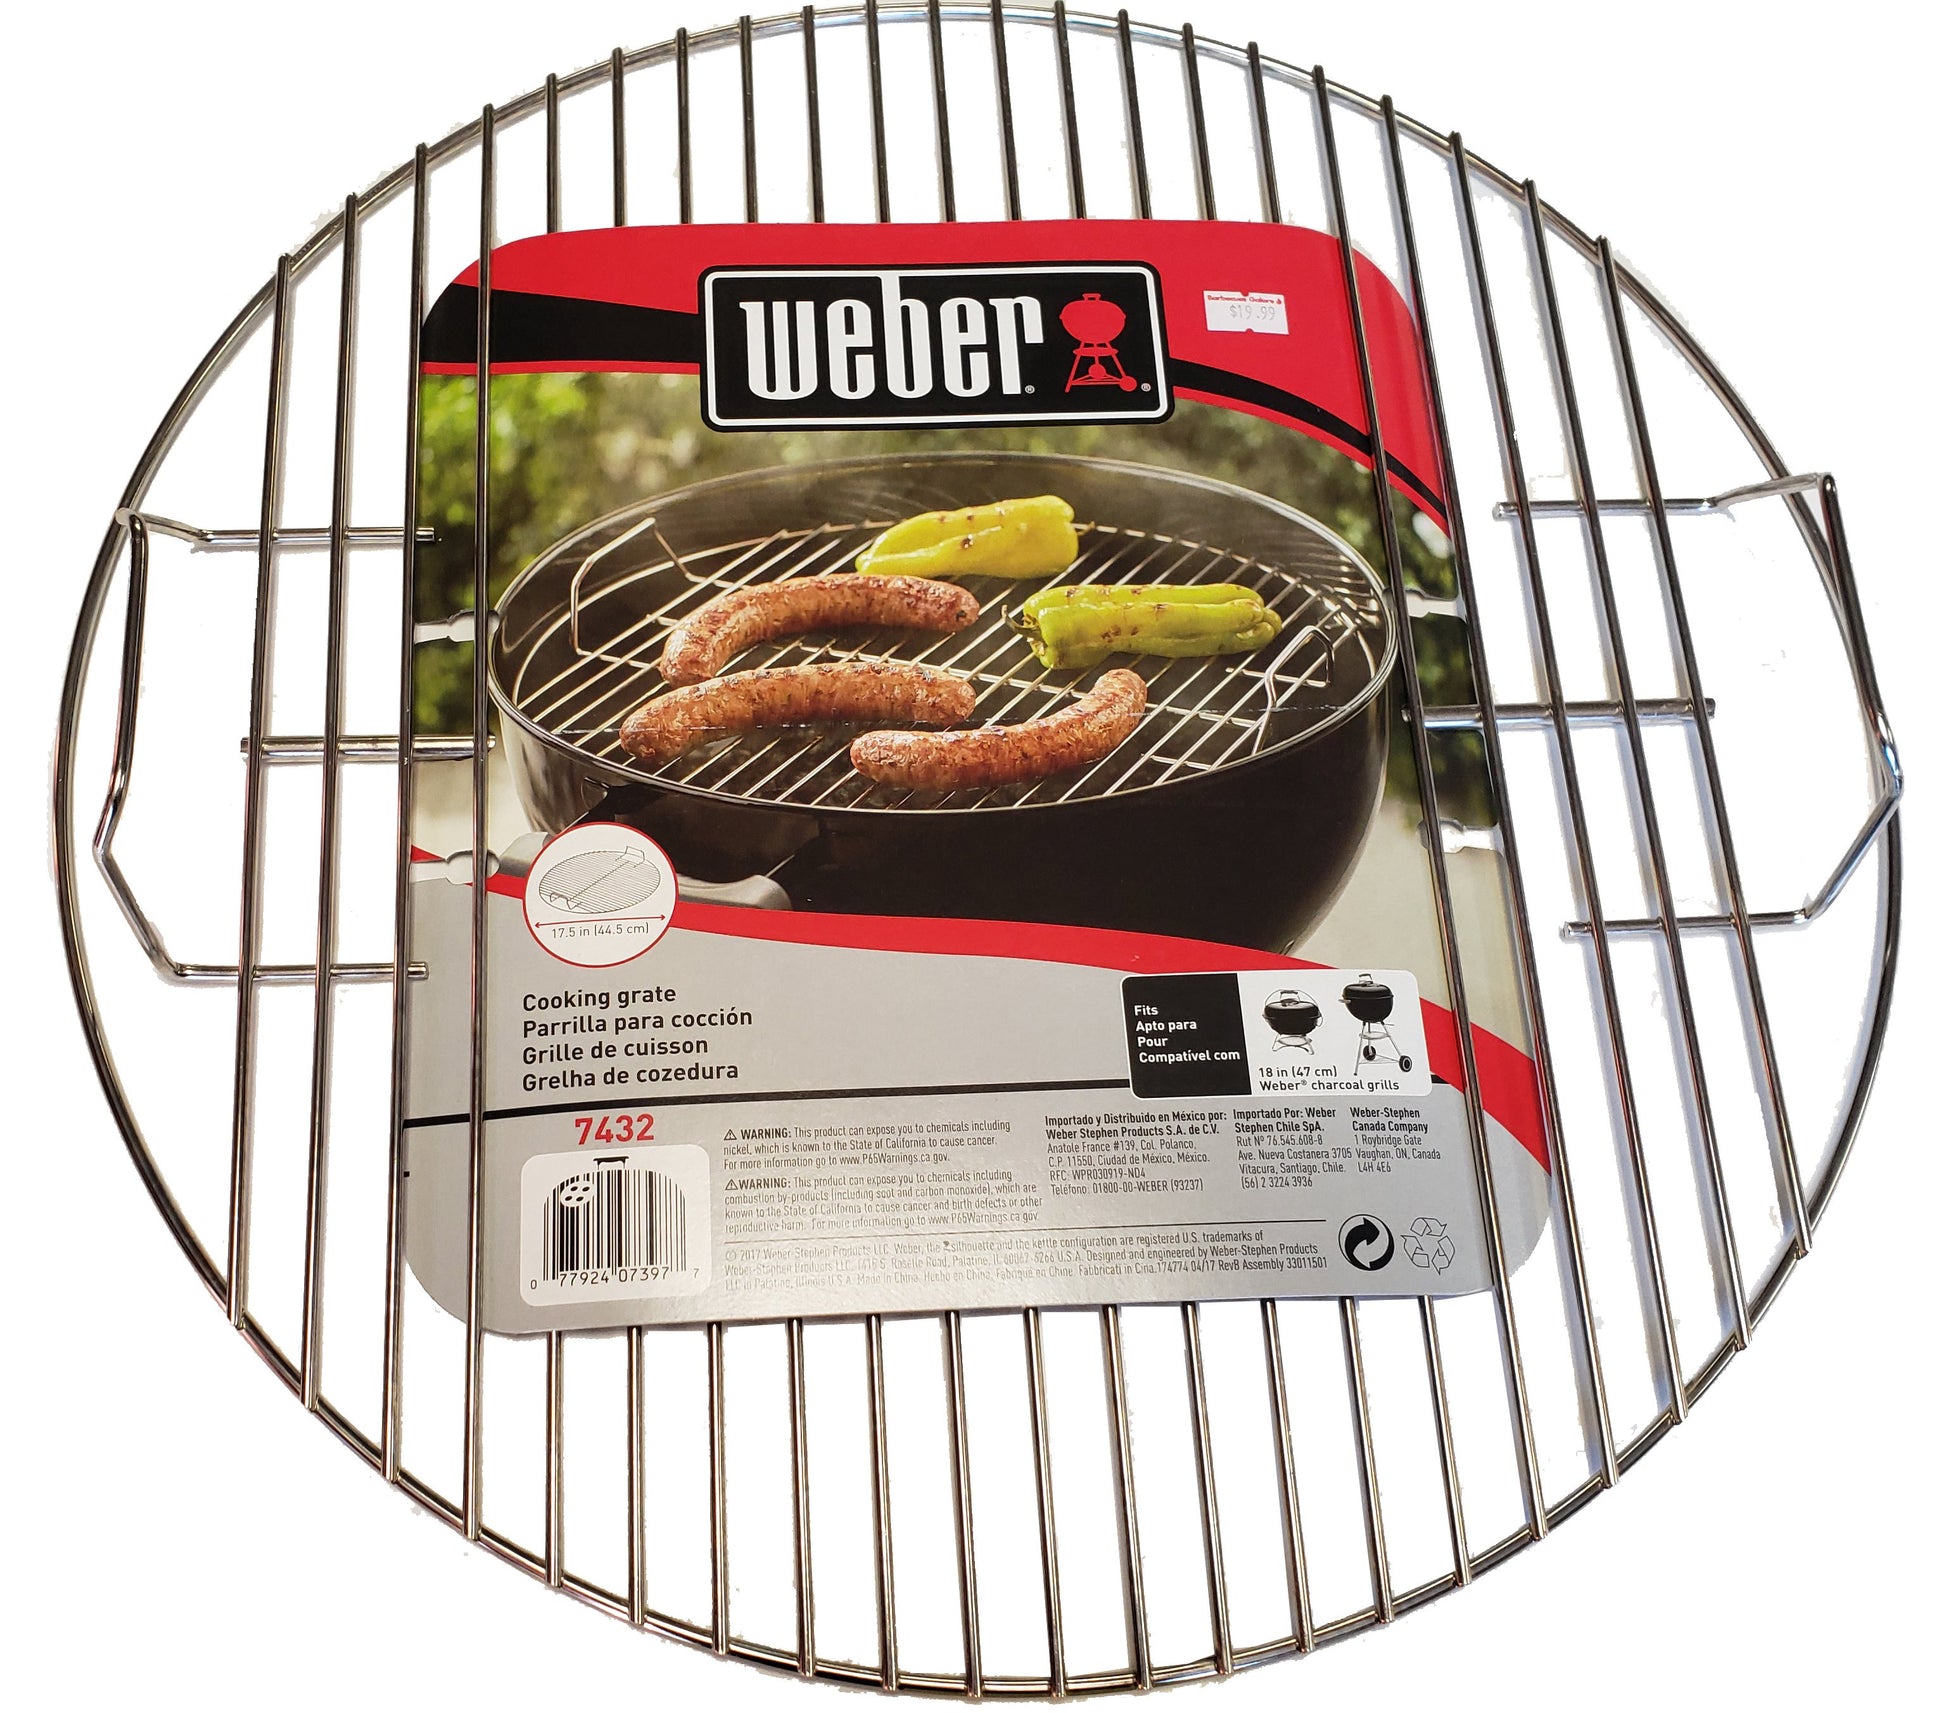 Weber 7432 18” Kettle Replacement Cooking Grate | Available in-store and online with Barbecues Galore. Stop by any of our 5 locations and one of our Bbq experts can help find what you need. 3 Locations in the GTA: Burlington, Oakville & Etobicoke, Ontario. 2 Locations in Calgary, Alberta.